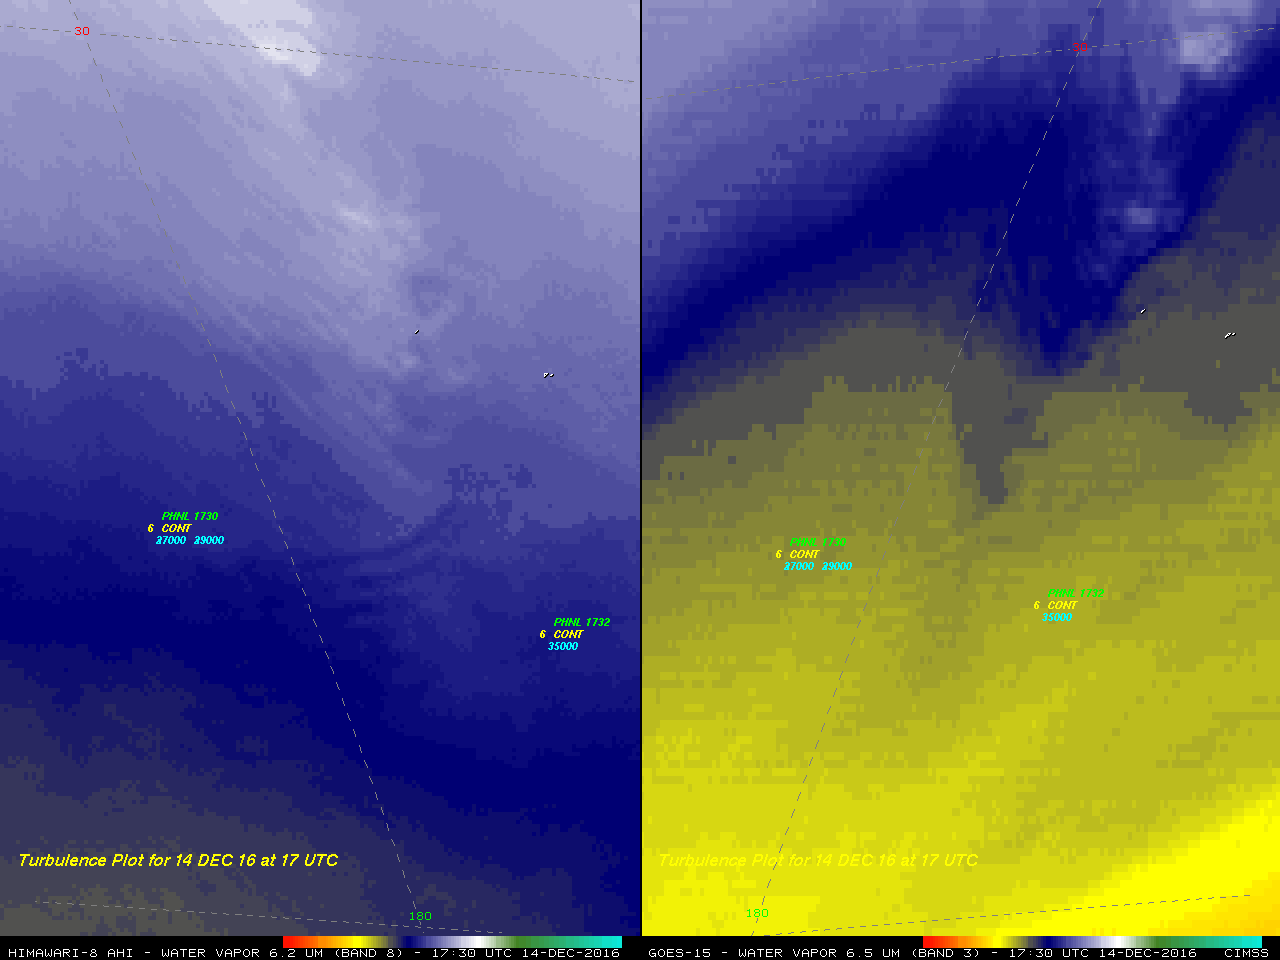 Himawari-8 Water Vapor (6.2 µm, left) and GOES-15 Water Vapor (6.5 µm, right) images, with pilot reports of turbulence [click to play animation]